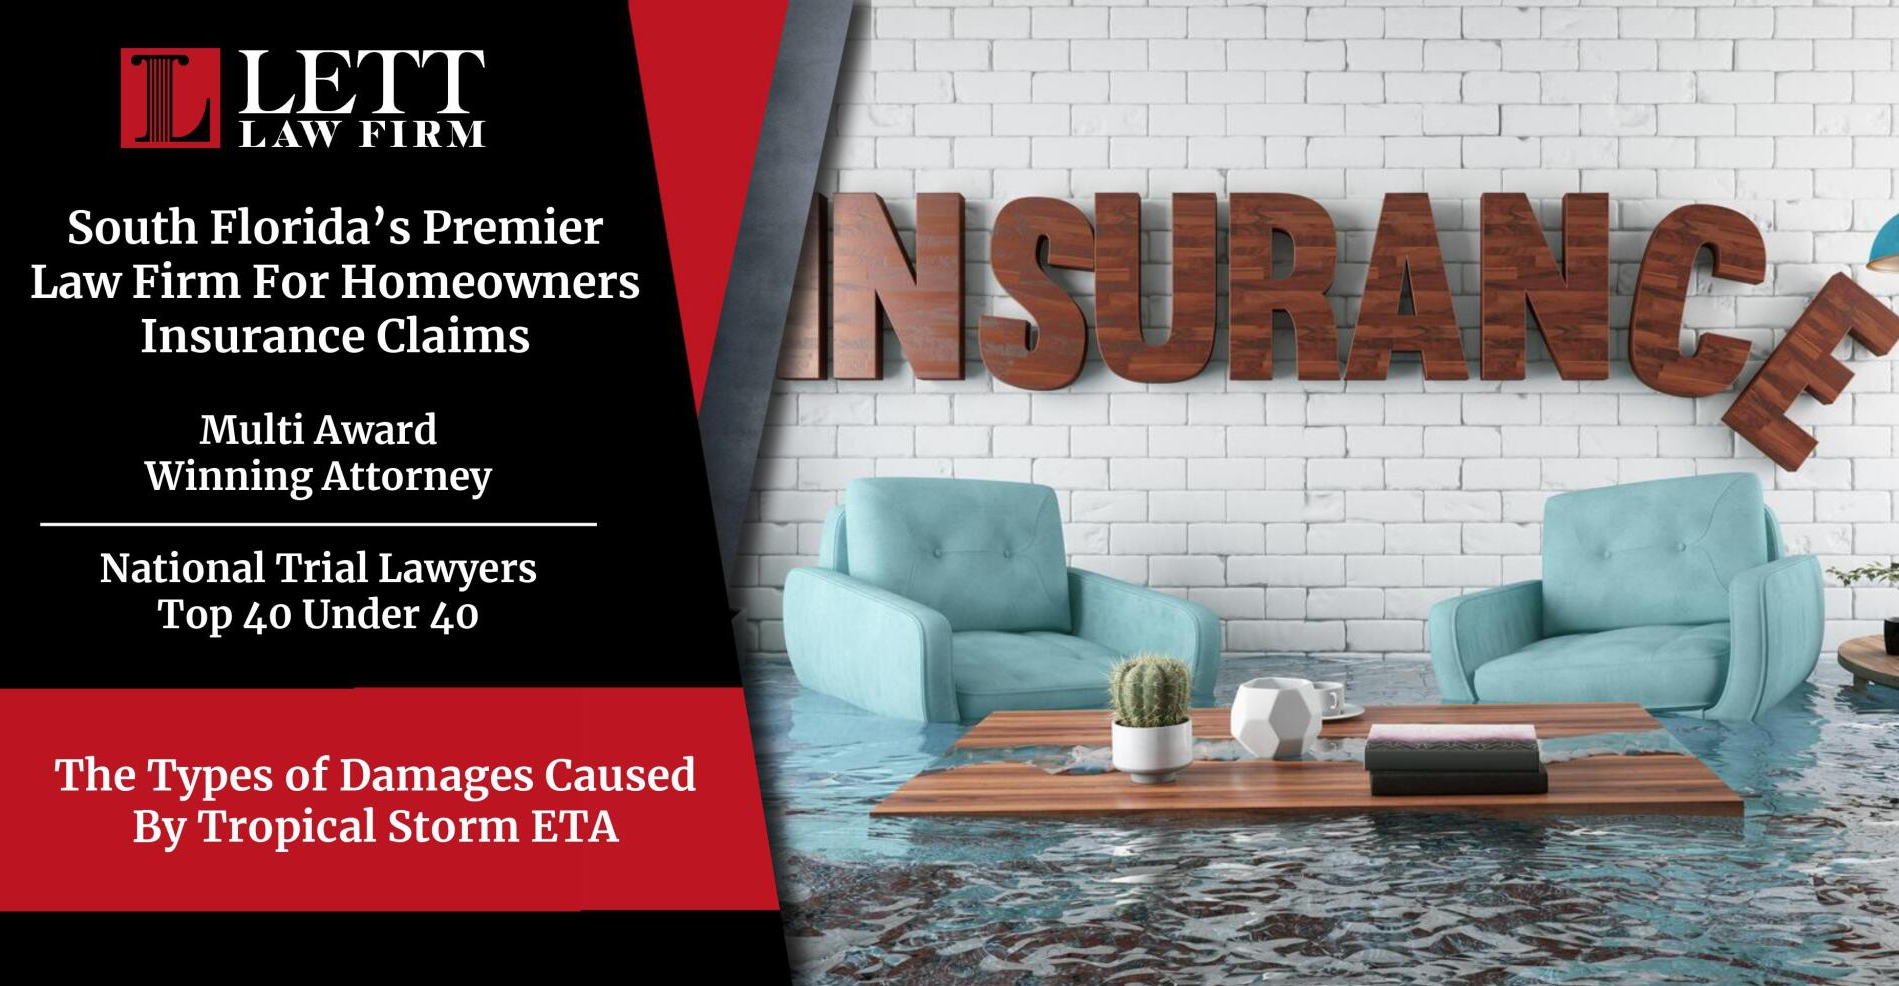 Miami Homeowners Insurance Lawyer - The Types of Damages Caused By Tropical Storm ETA